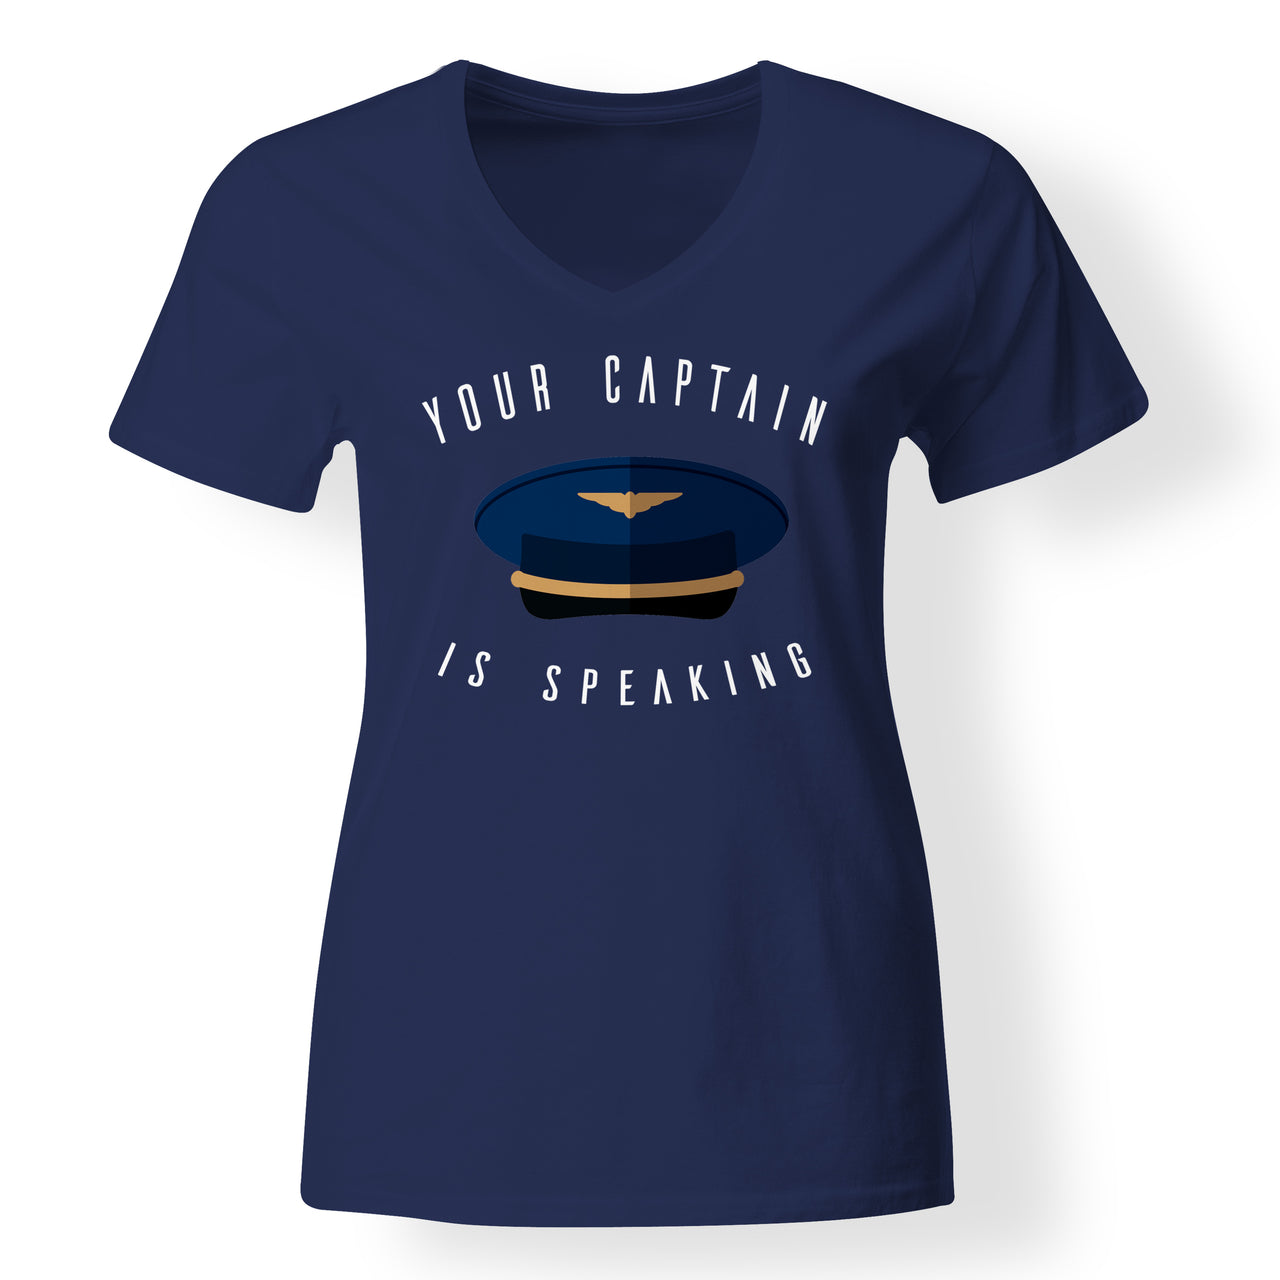 Your Captain Is Speaking Designed V-Neck T-Shirts